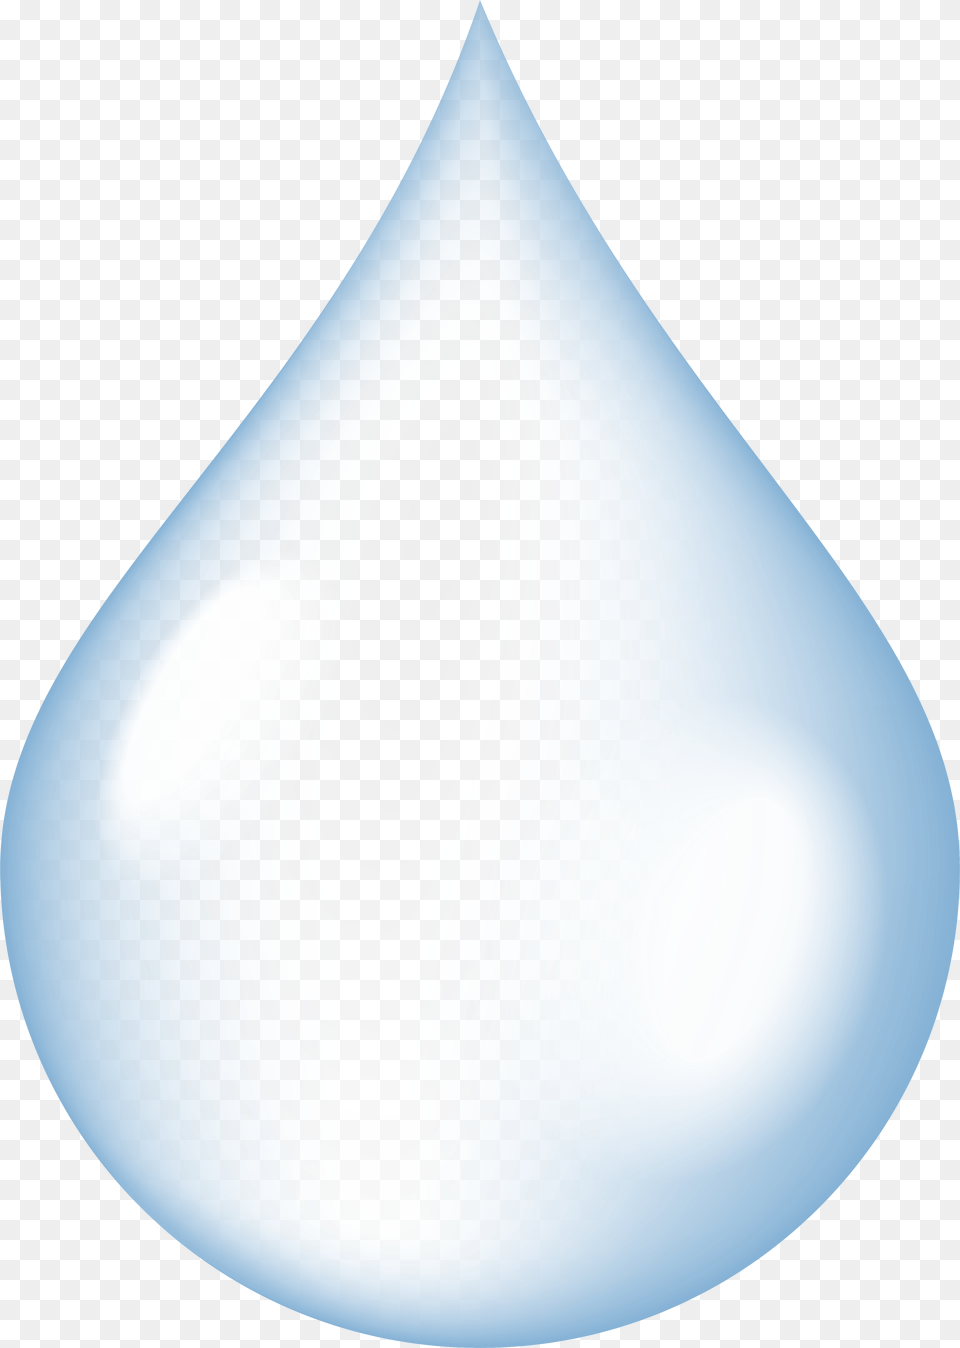 Best Water Drop Clipart Transparent Water Drops, Droplet, Lighting, Astronomy, Moon Png Image